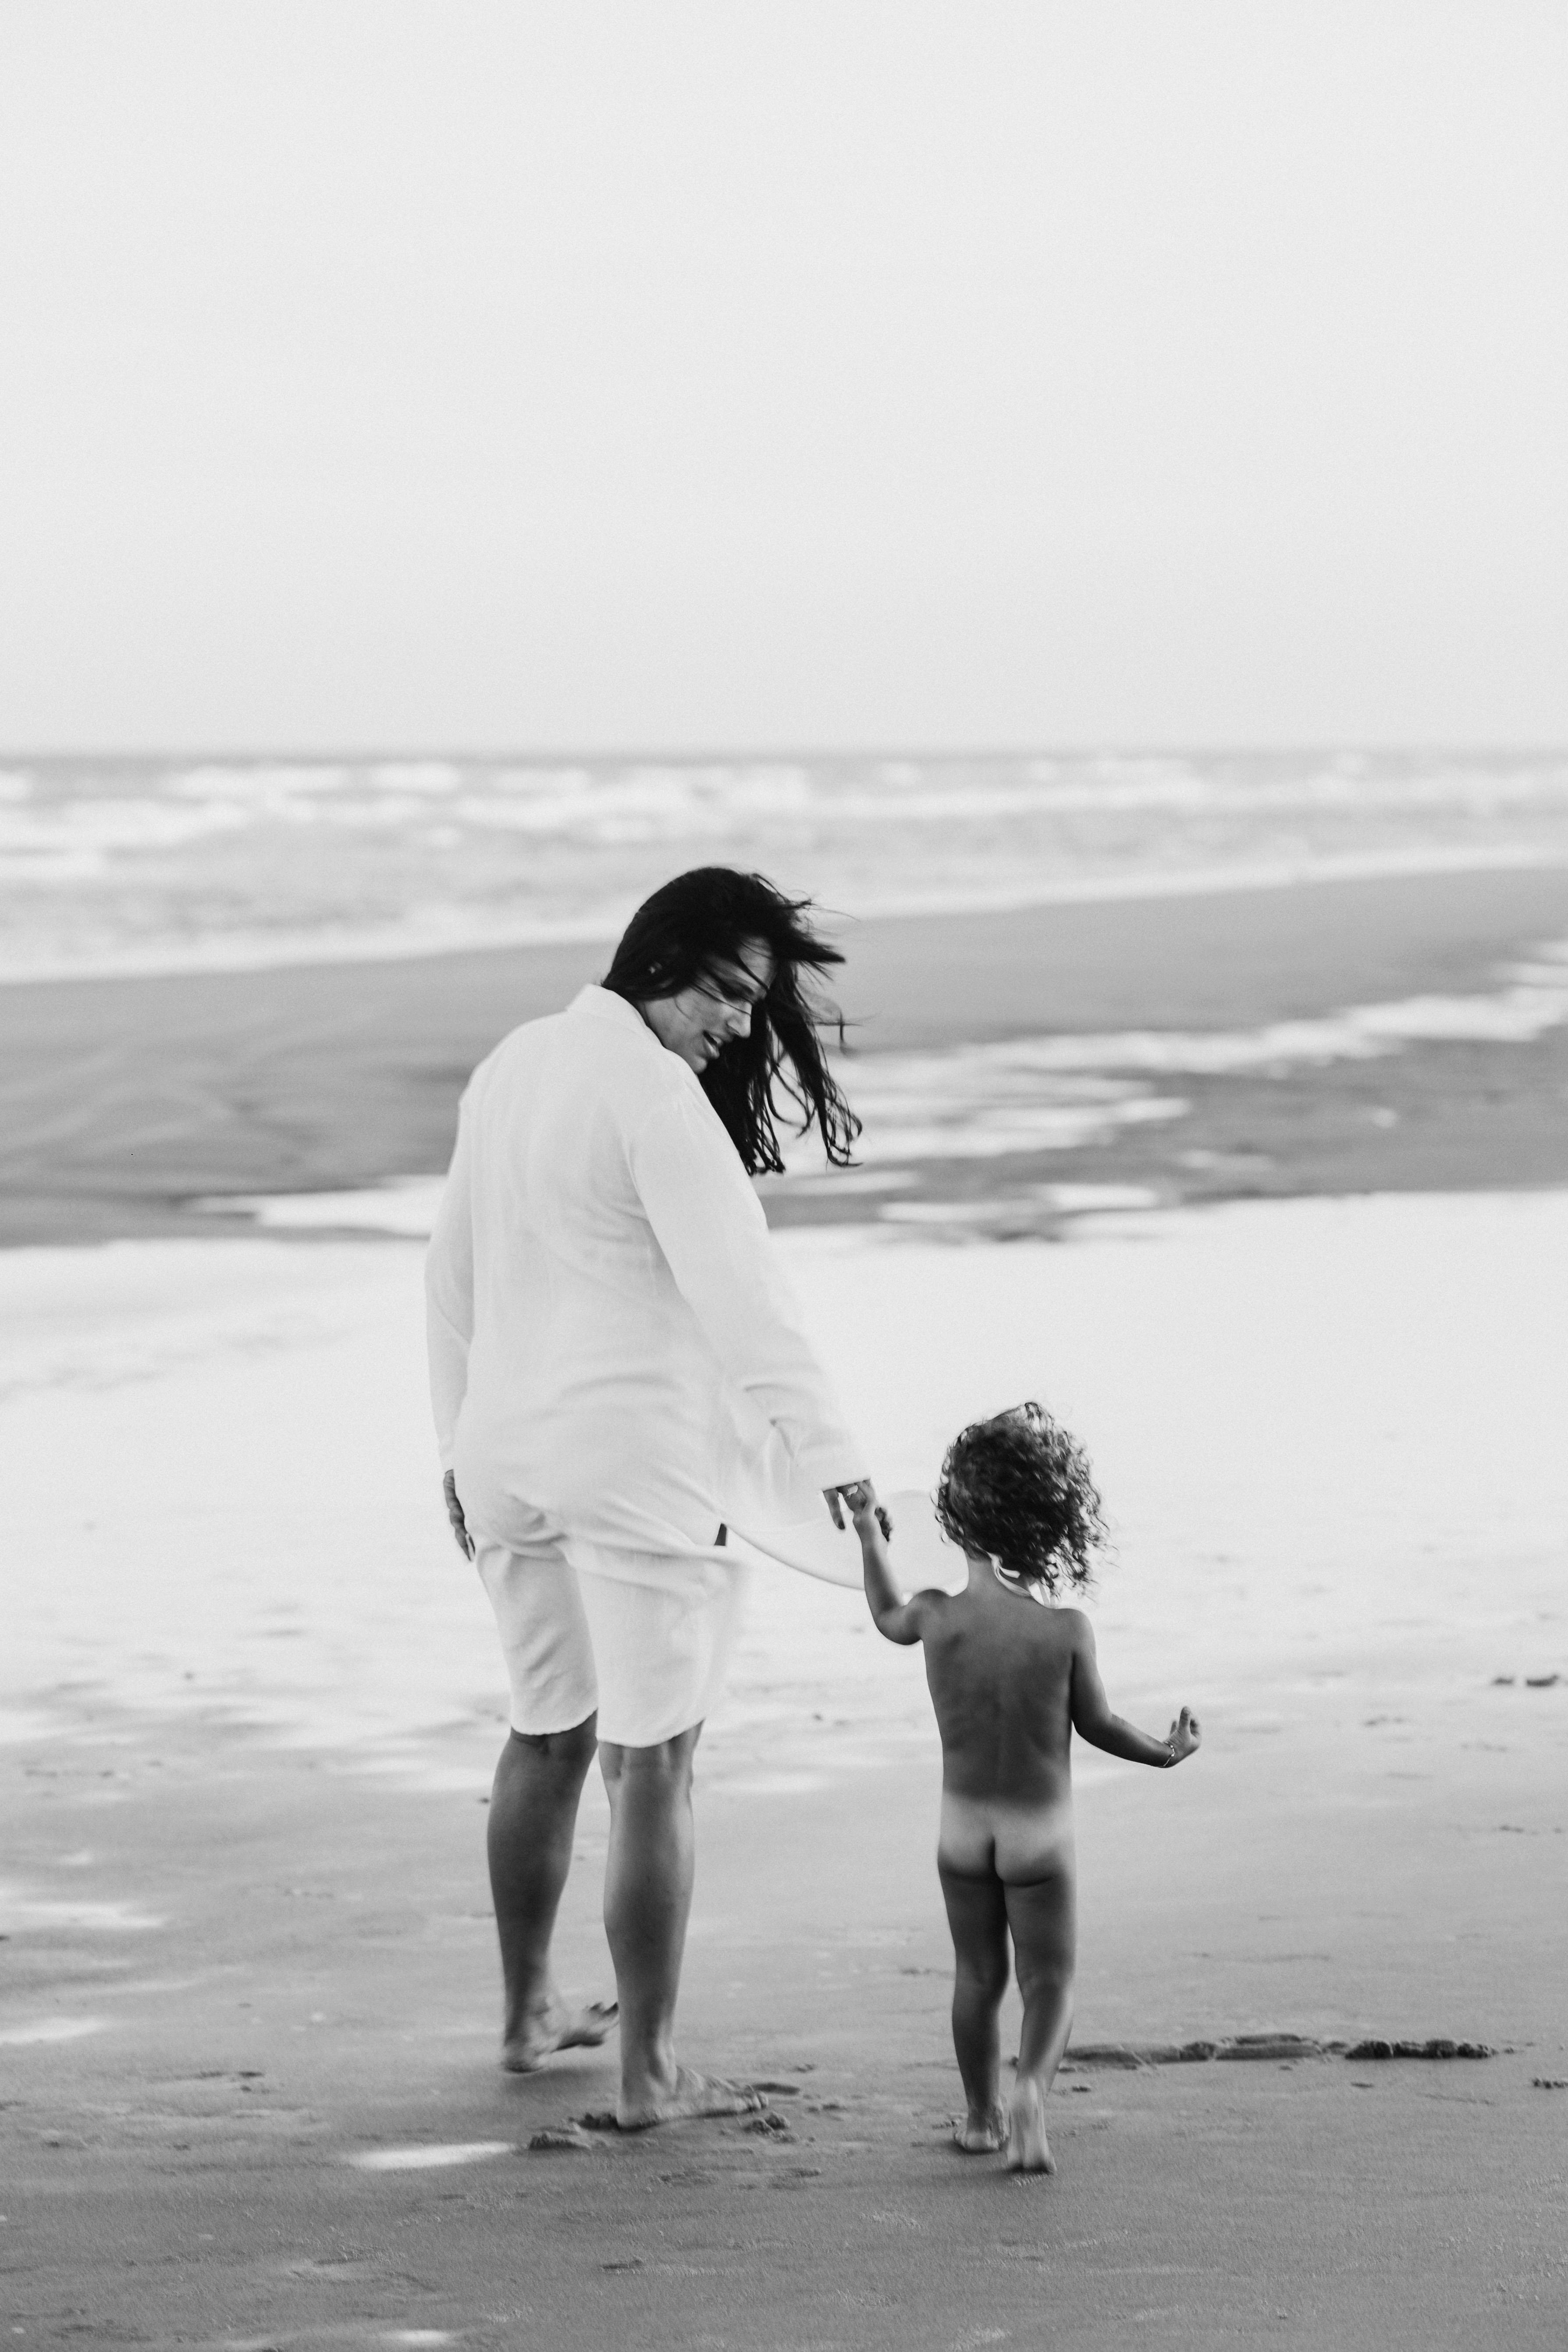 Black nude girl beach Woman And Nude Toddler Walking At The Beach Free Stock Photo